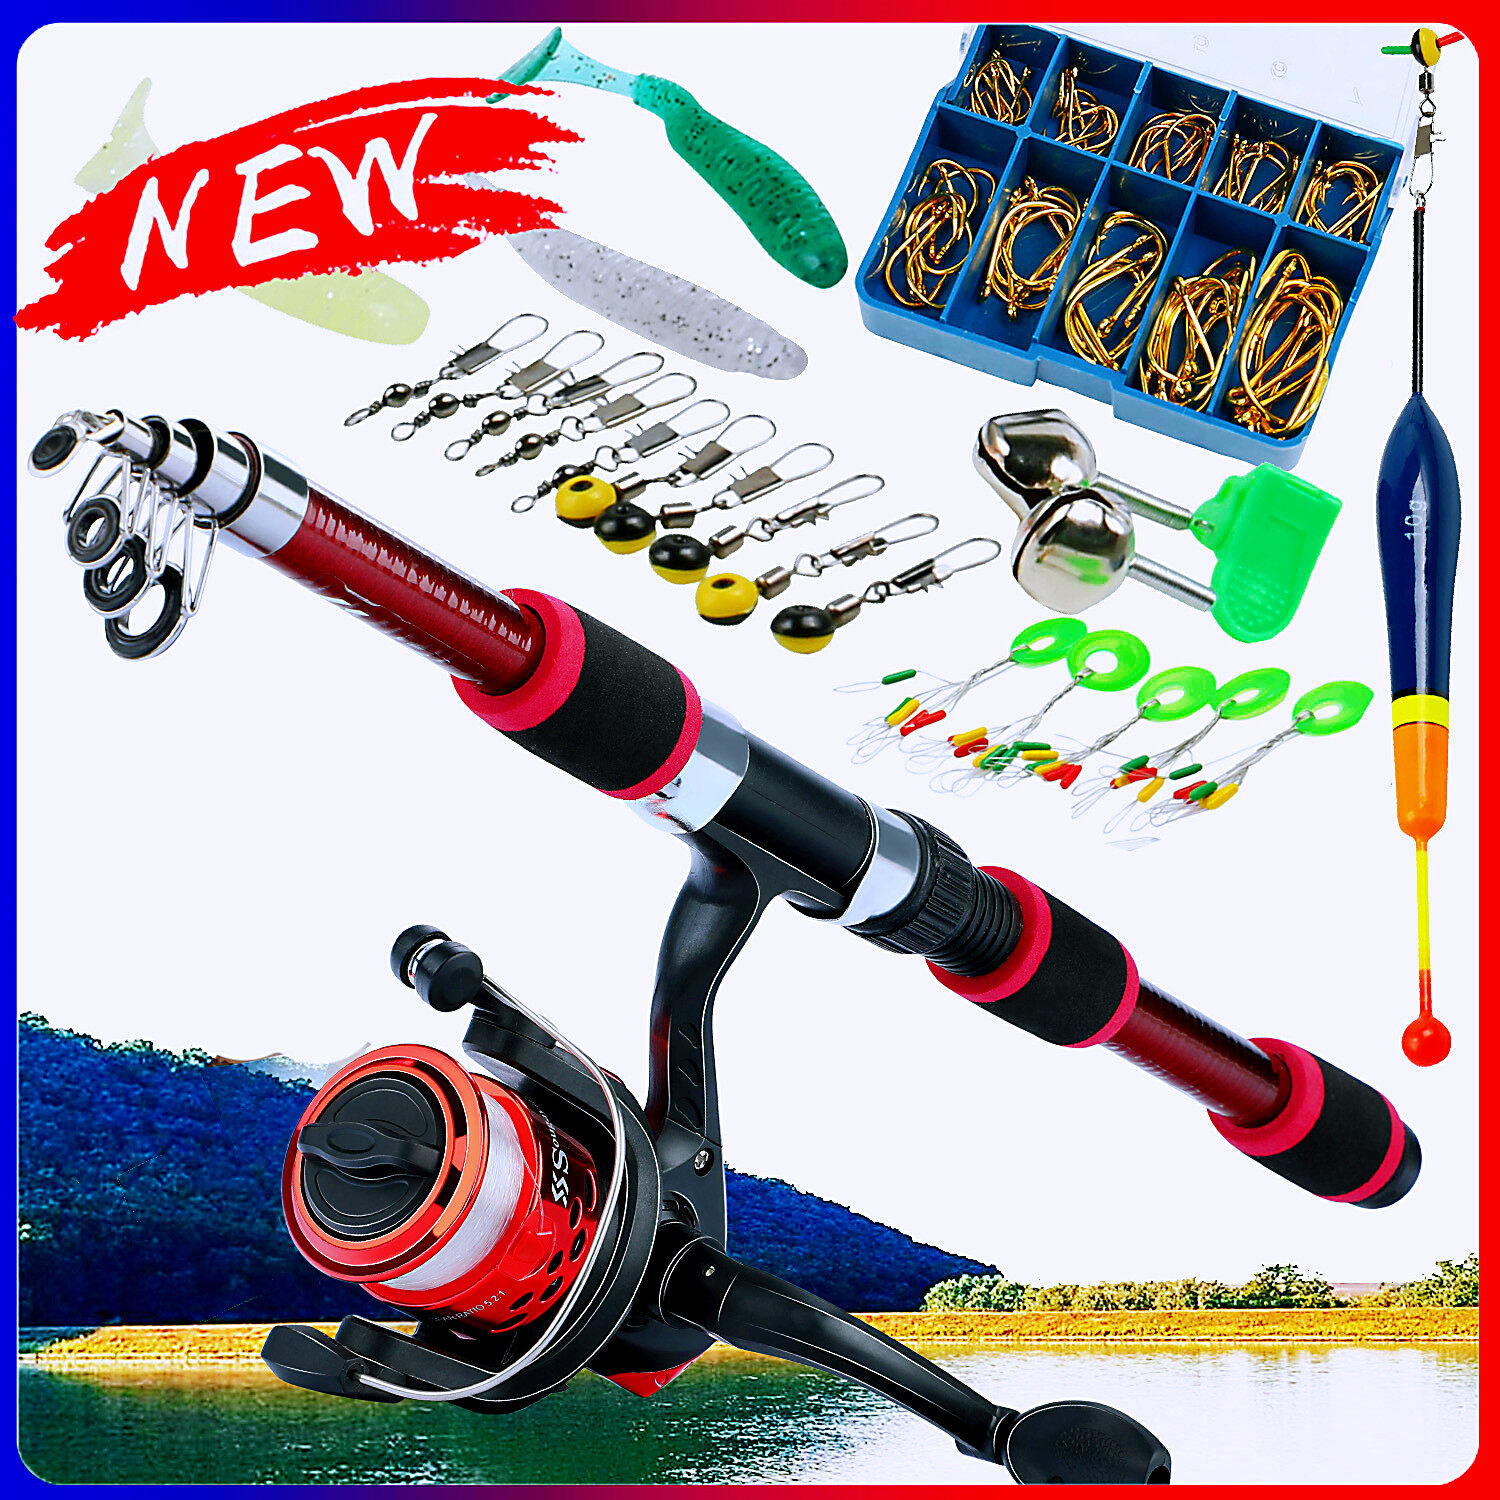  Fishing Pole Fishing Rod Reel Combo Full Kit with 2pcs 2.1m  Telescopic Fishing Rods 2pcs Spinning Reels Fishing Lures Hook Accessories  Suitable for Travel Fishing : Sports & Outdoors